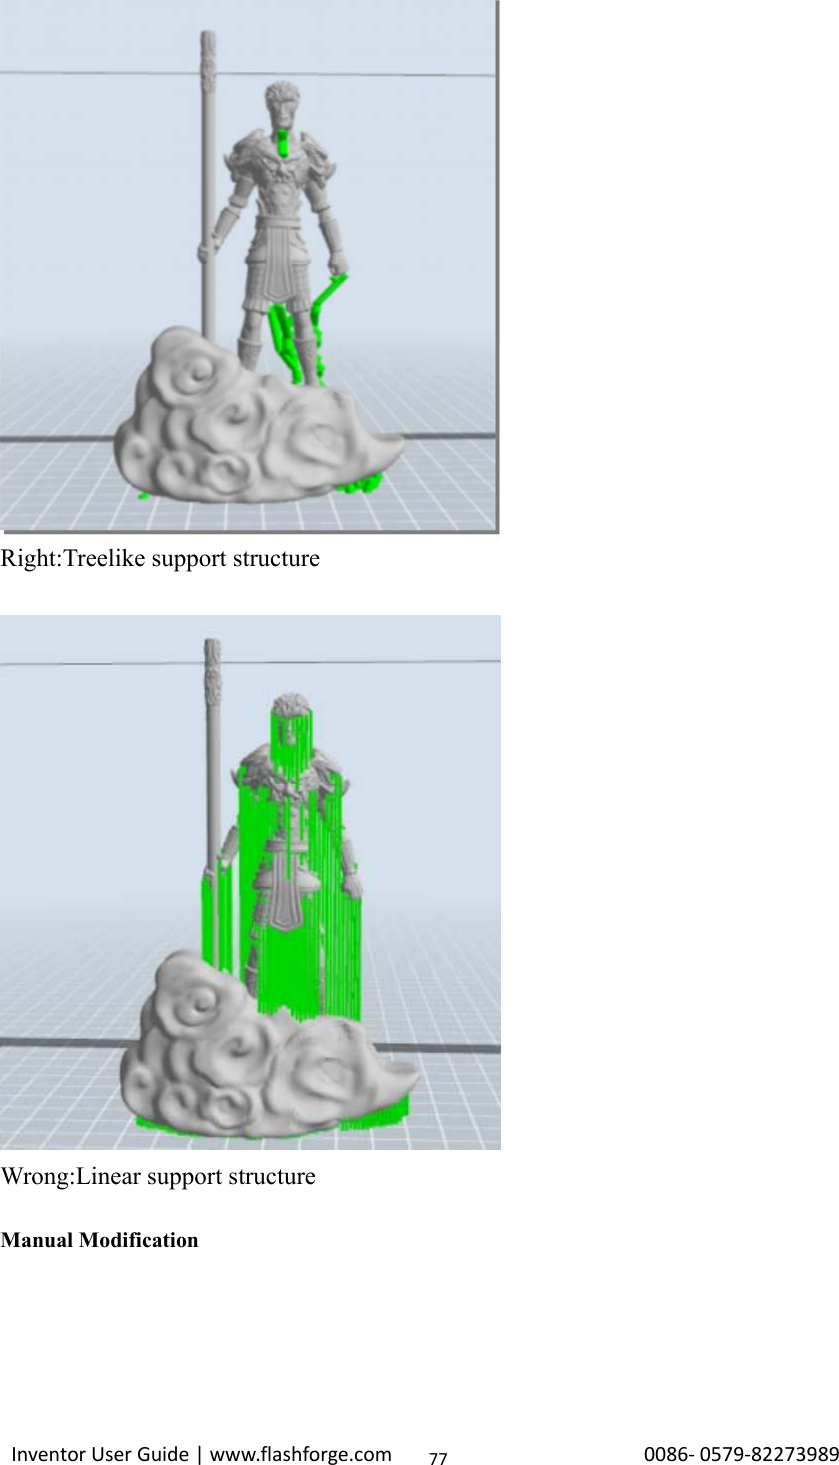 Inventor User Guide | www.flashforge.com 0086‐0579‐8227398977Right:Treelike support structureWrong:Linear support structureManual Modification